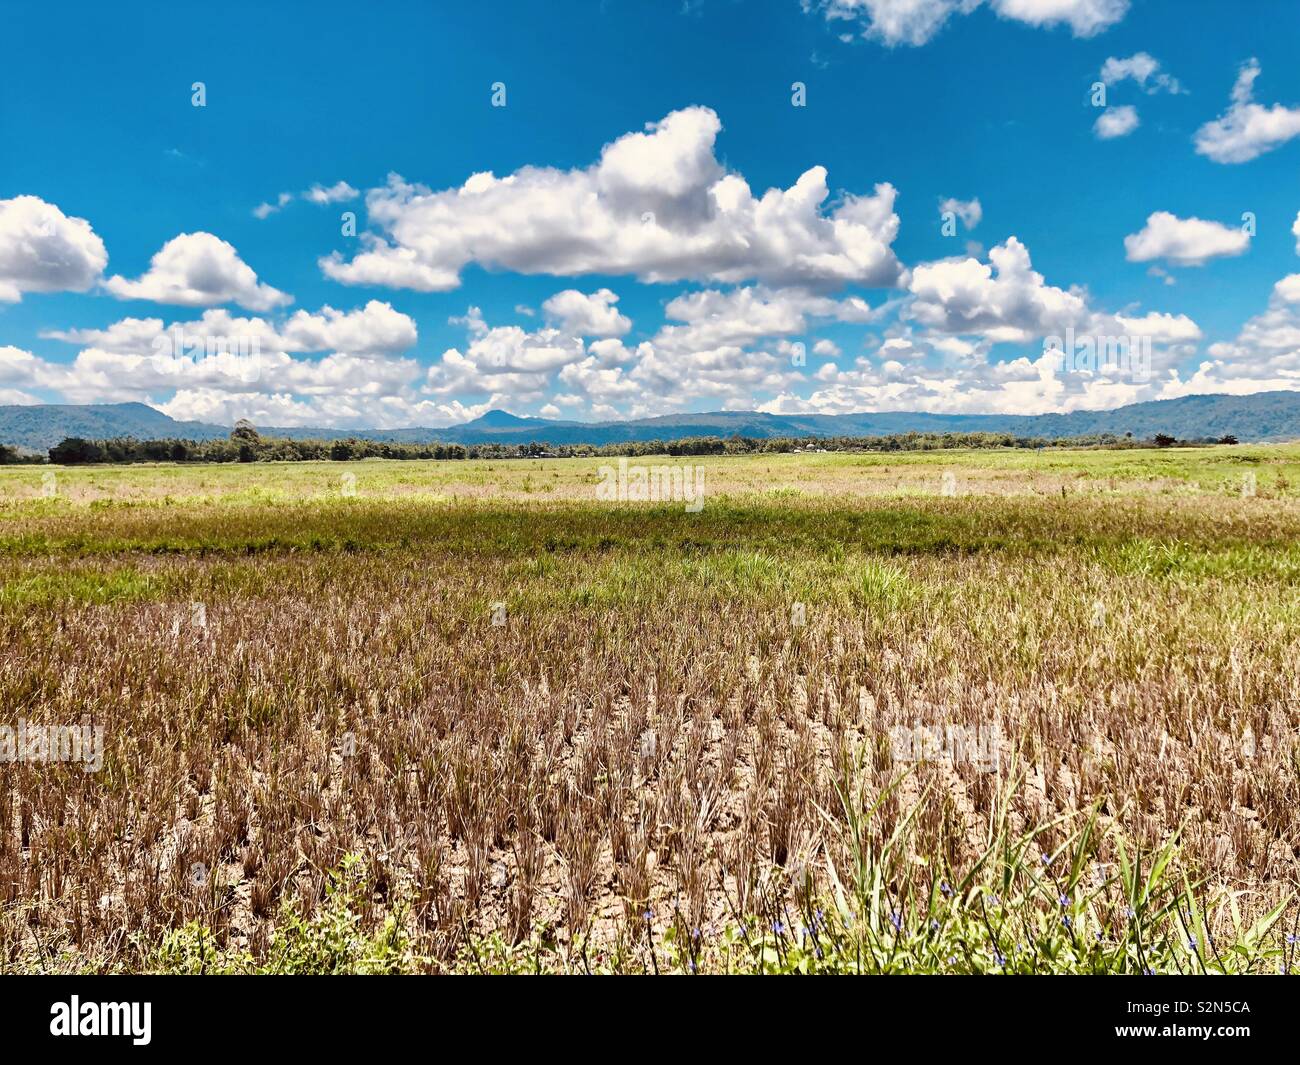 Lanao del Sur, Philippines. Rice crops wilted by the El Nino or drought phenomenon. Rice farms are heavily damaged by the extreme hot and humid season affecting harvest of striving farmers. Stock Photo